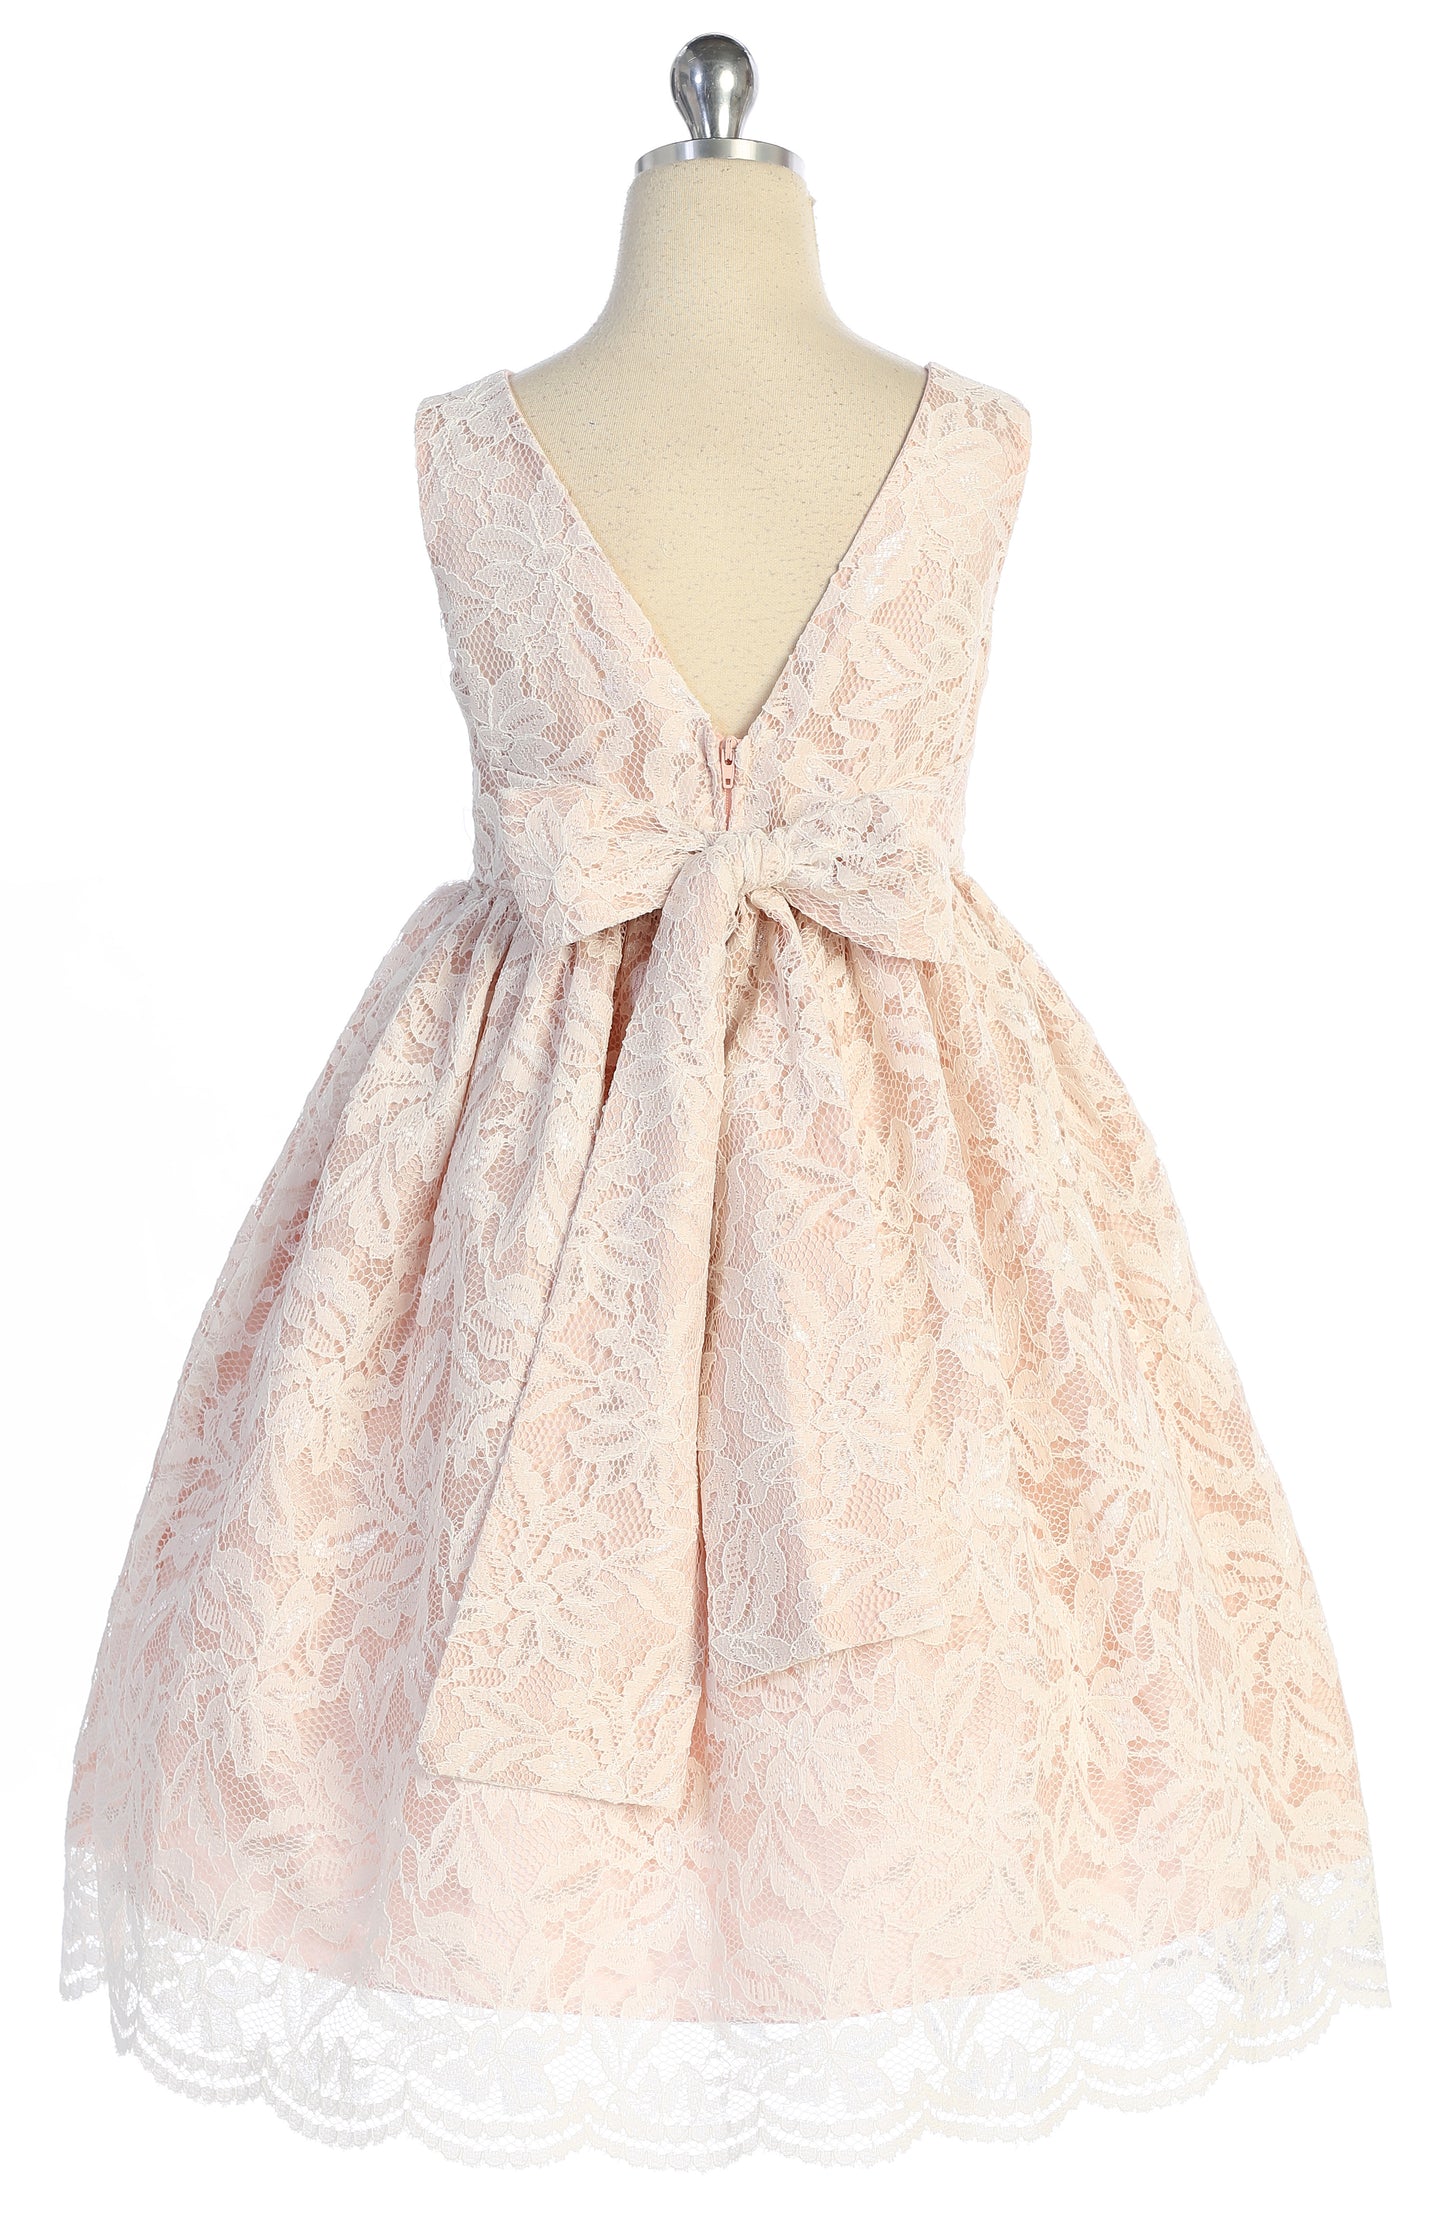 All Lace Girls Dress with V Back & Bow and Thick Pearl Trim